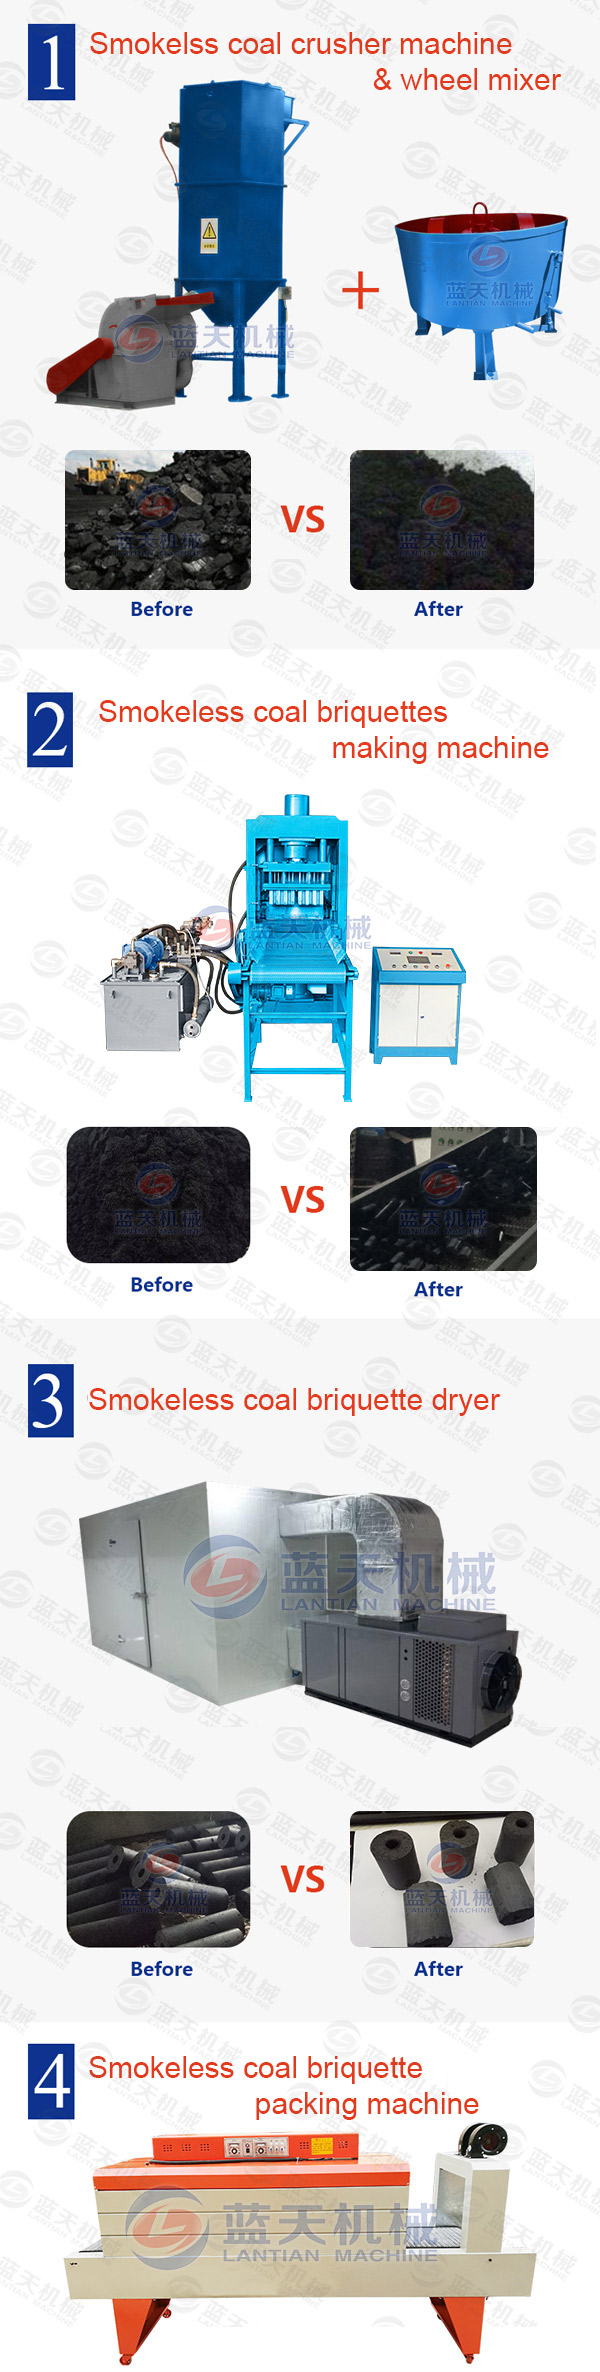 Product line of smokeless coal briquettes making machine